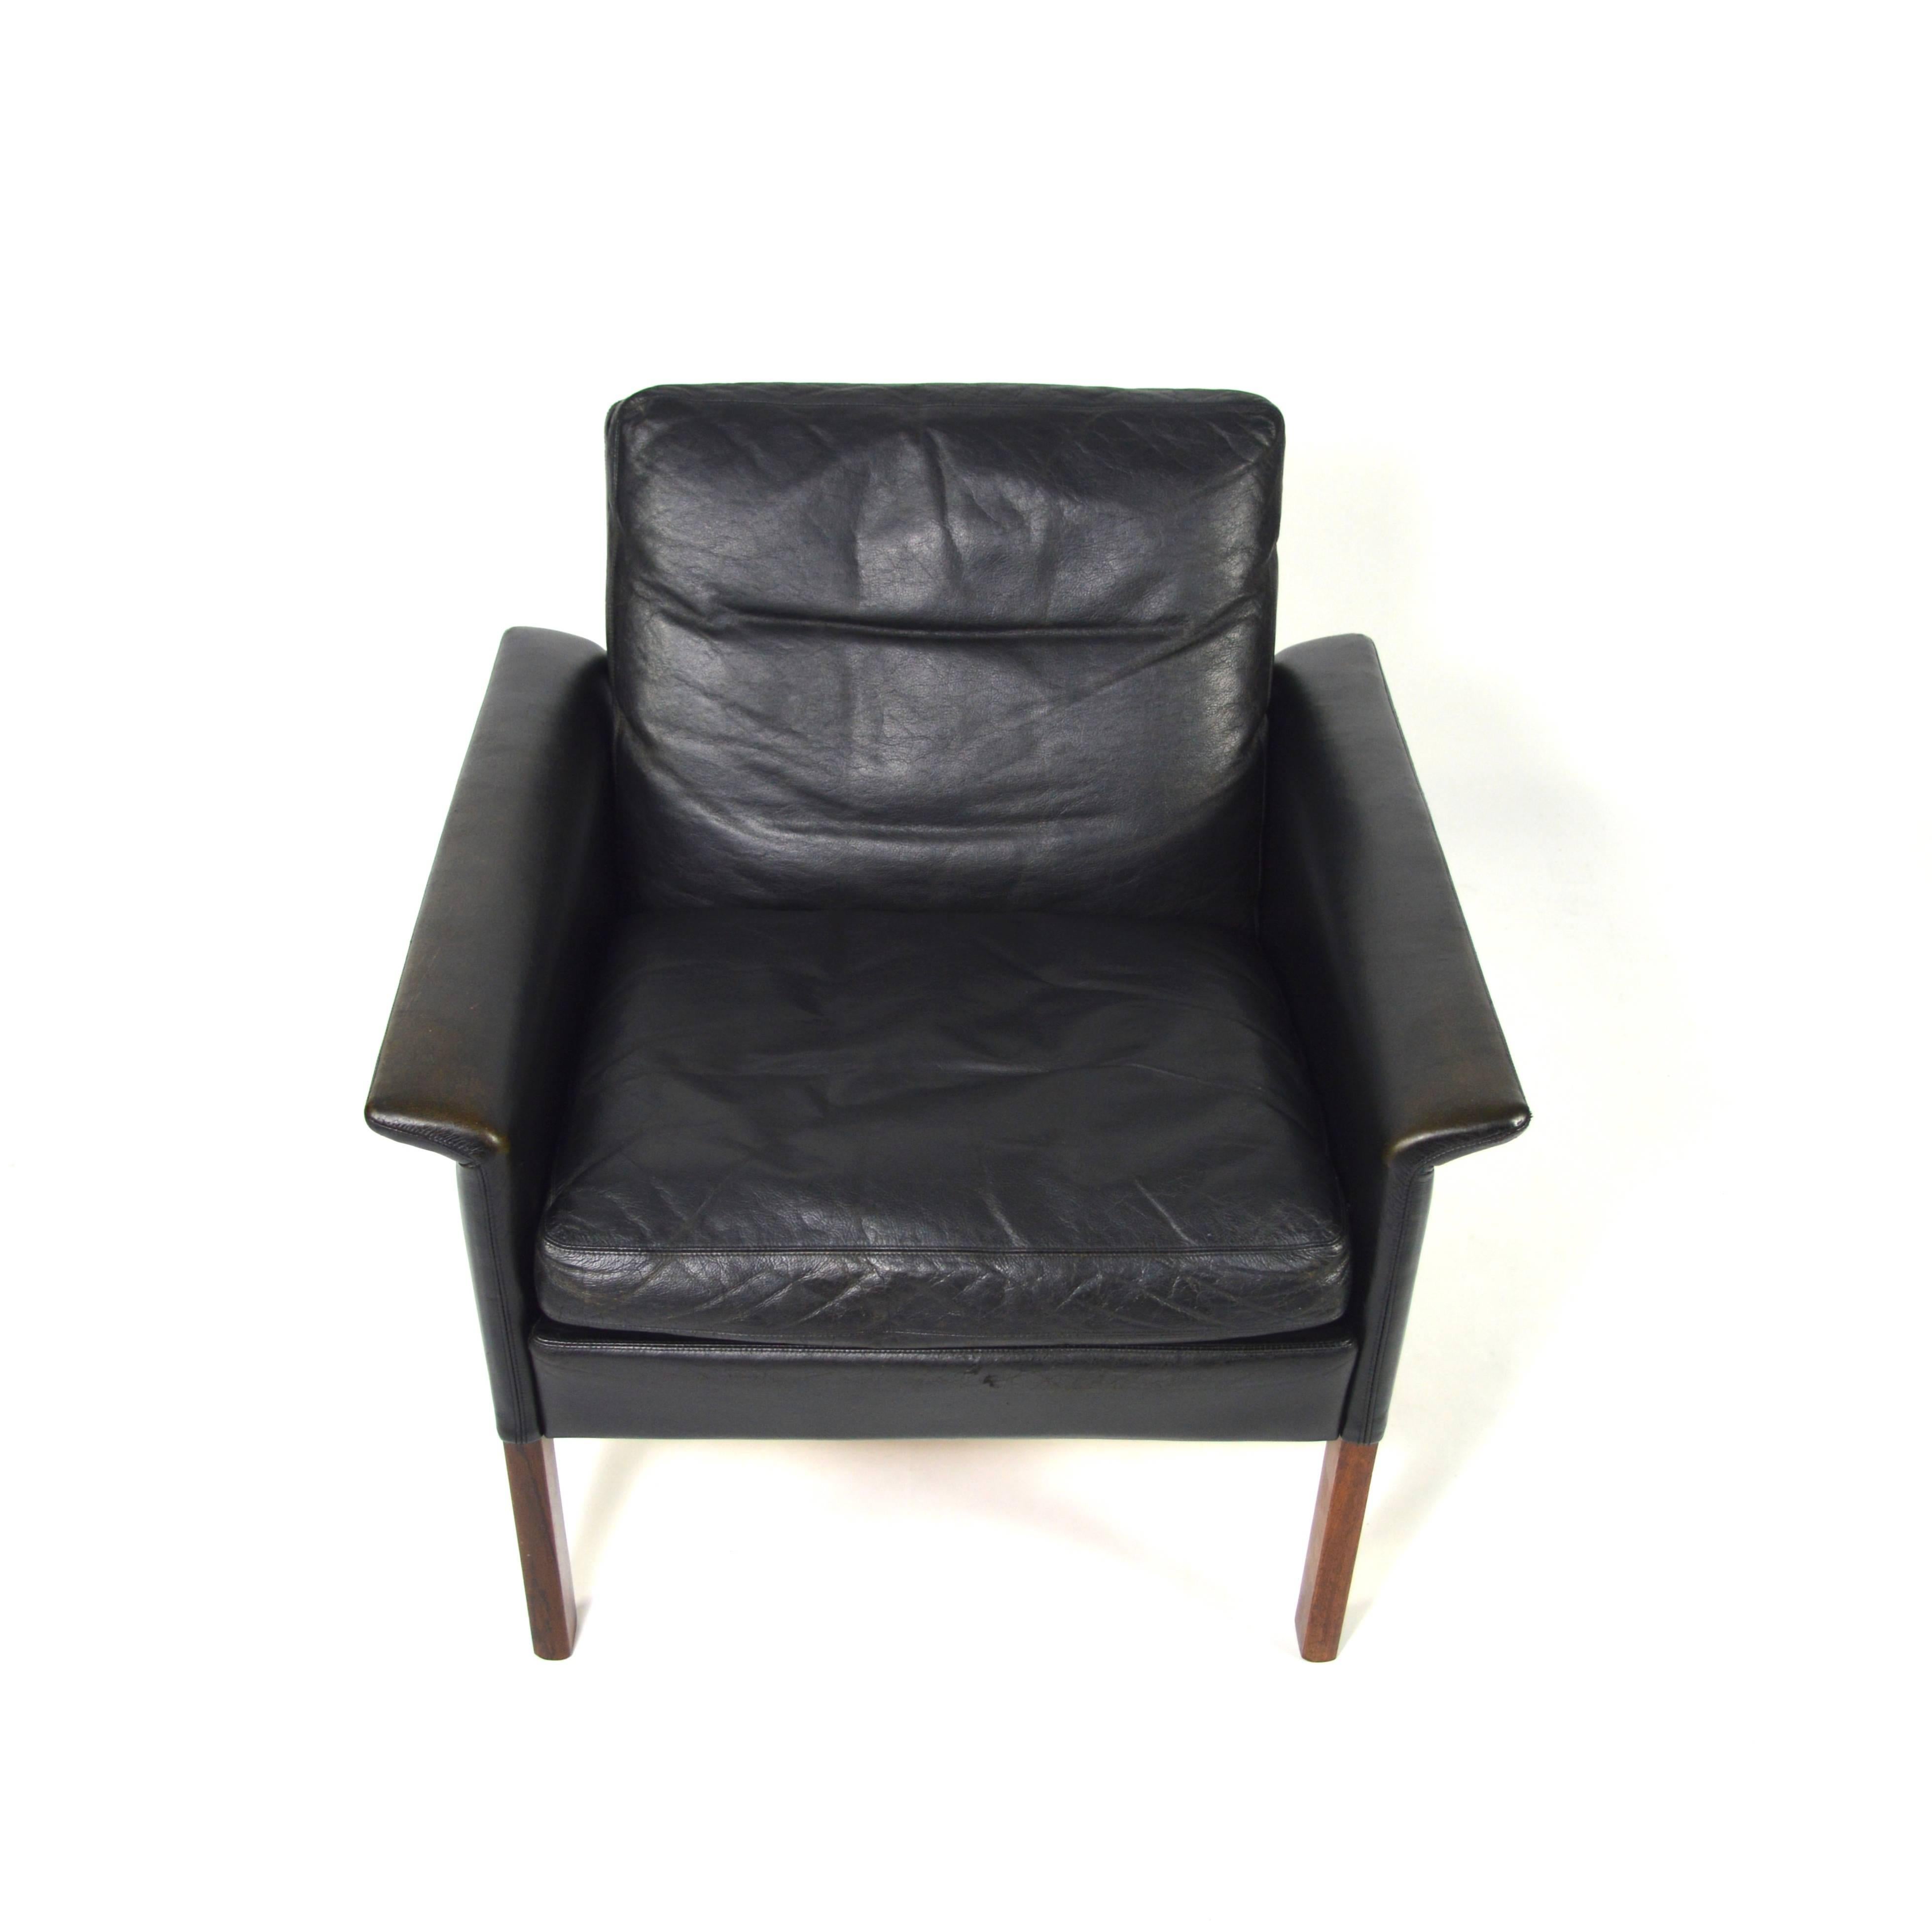 Mid-20th Century Hans Olsen Model 500 Lounge Chair in Black Leather and Rosewood, Denmark, 1960s